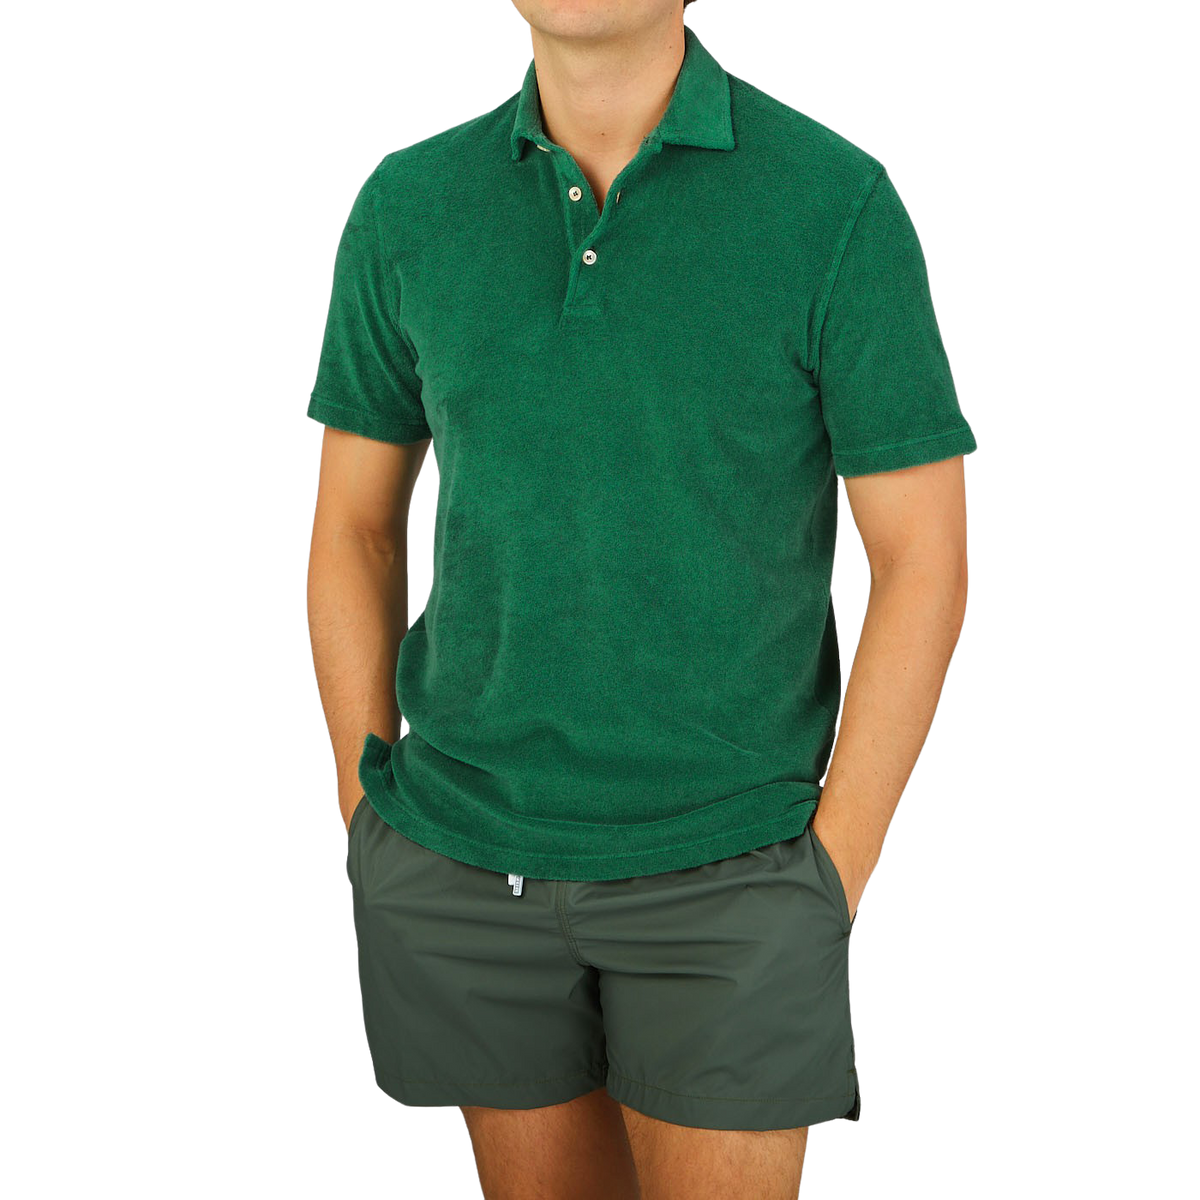 Baltzar, wearing a Fedeli Grass Green Cotton Towelling Polo Shirt and shorts.